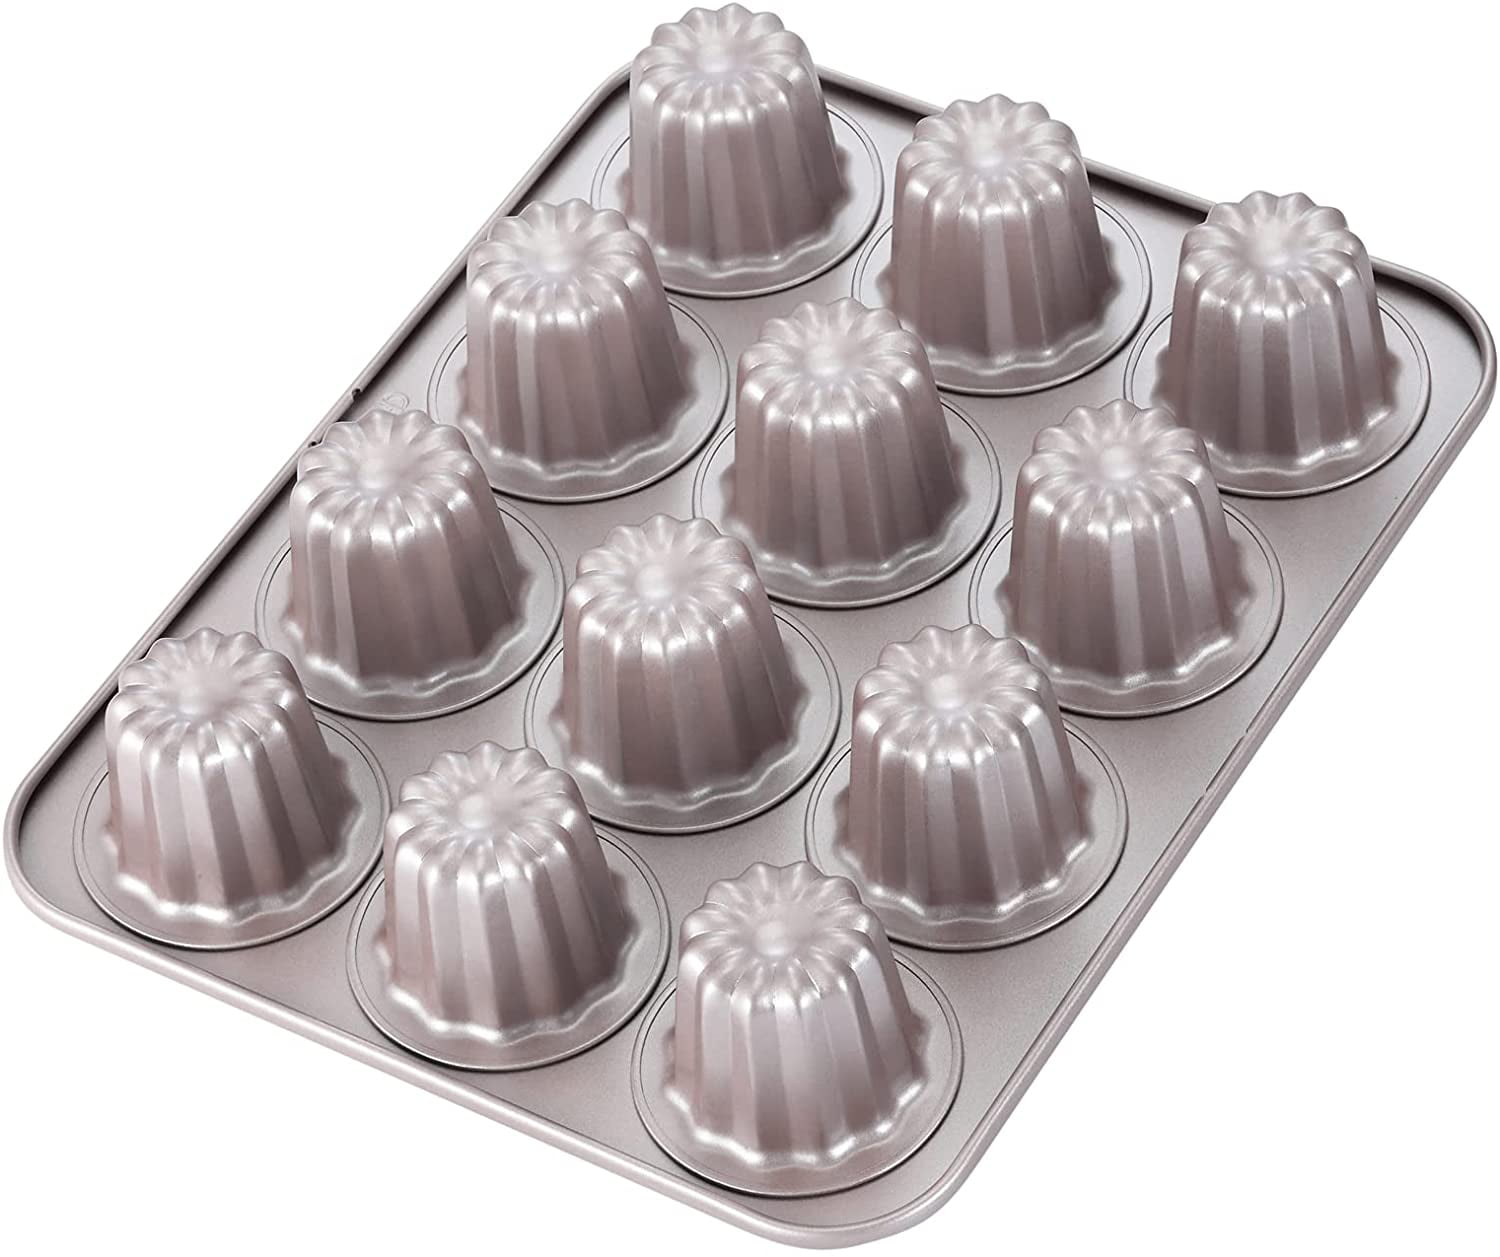 CHEFMADE Nonstick 12 Cup Muffin Cupcake Pan Carbon Steel Cannele Mould Bakeware 